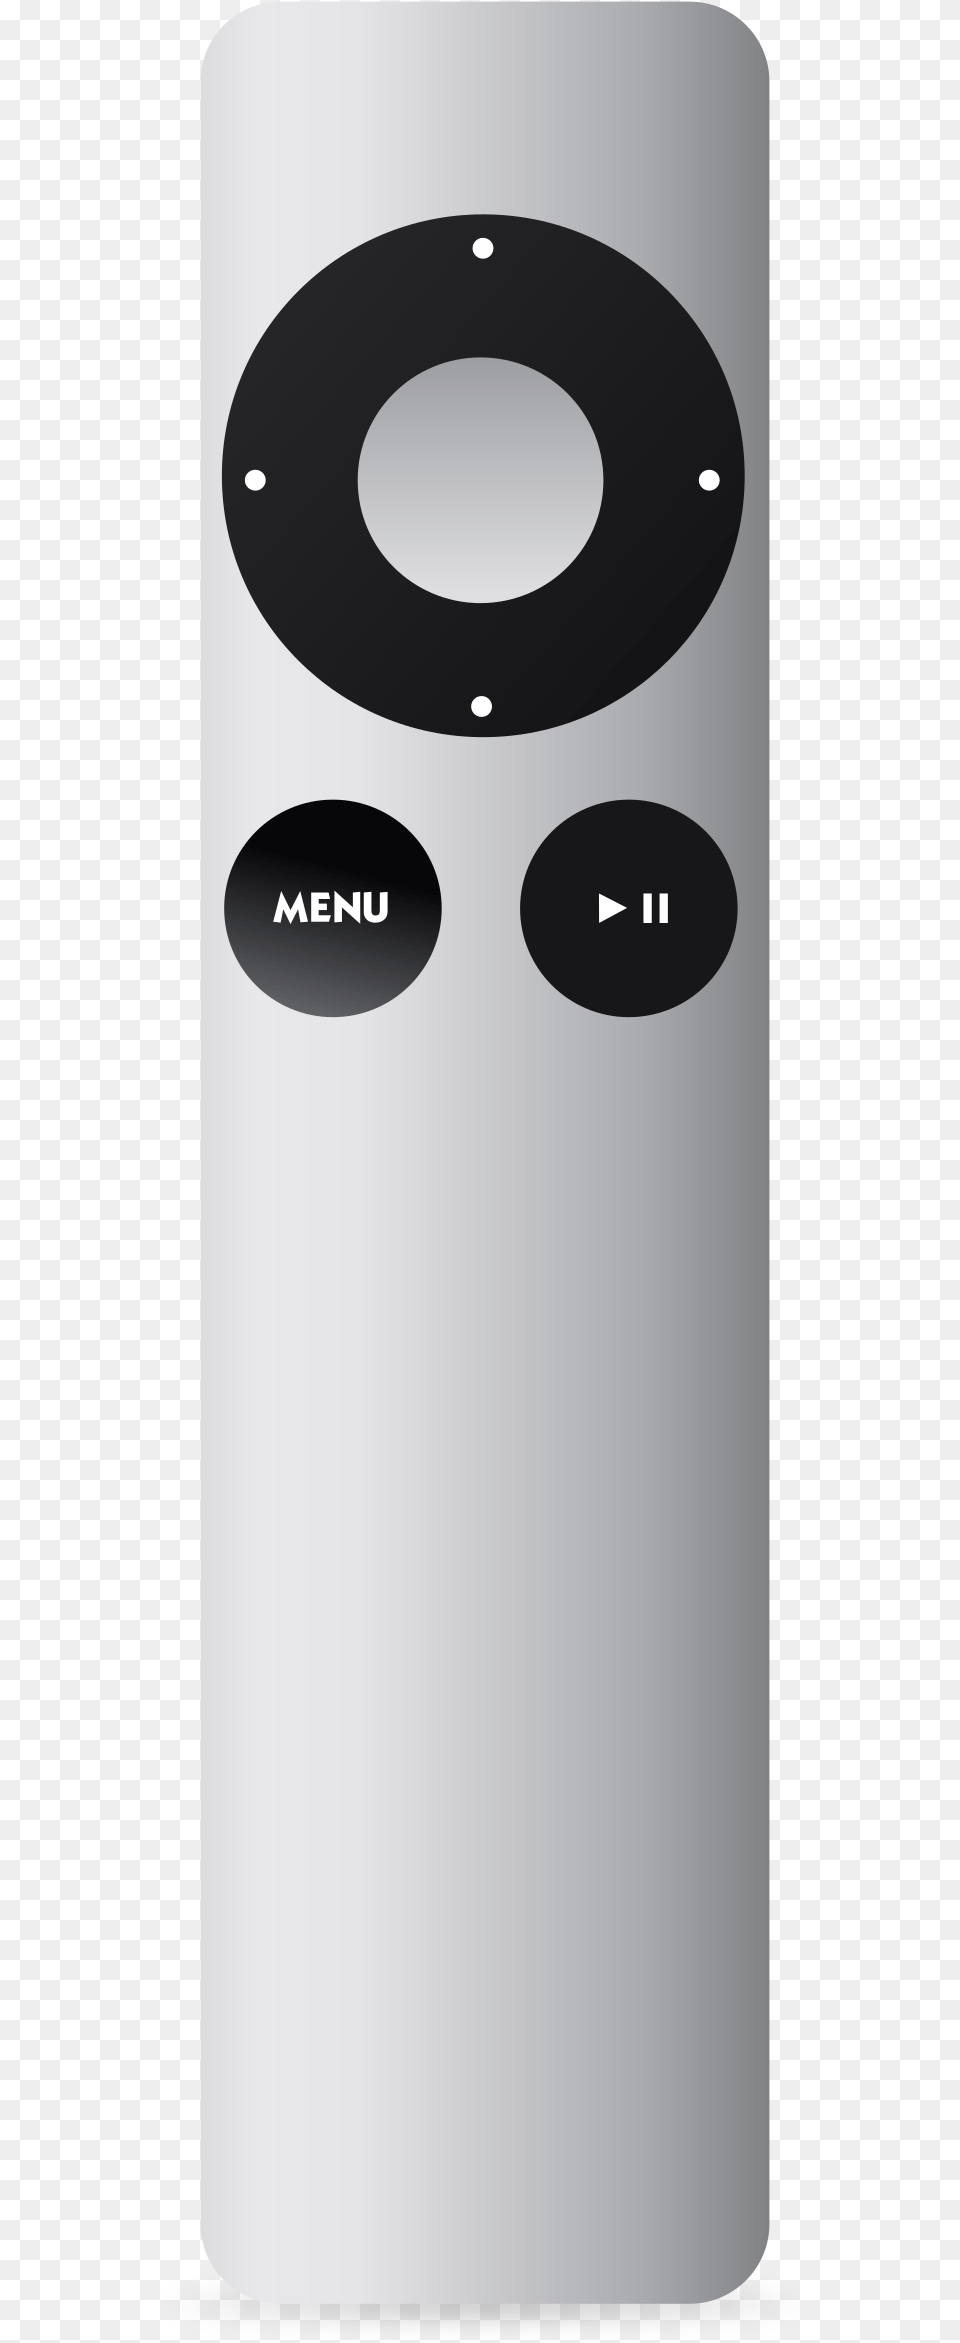 This Free Icons Design Of Apple Remote Aluminum, Electronics, Remote Control Png